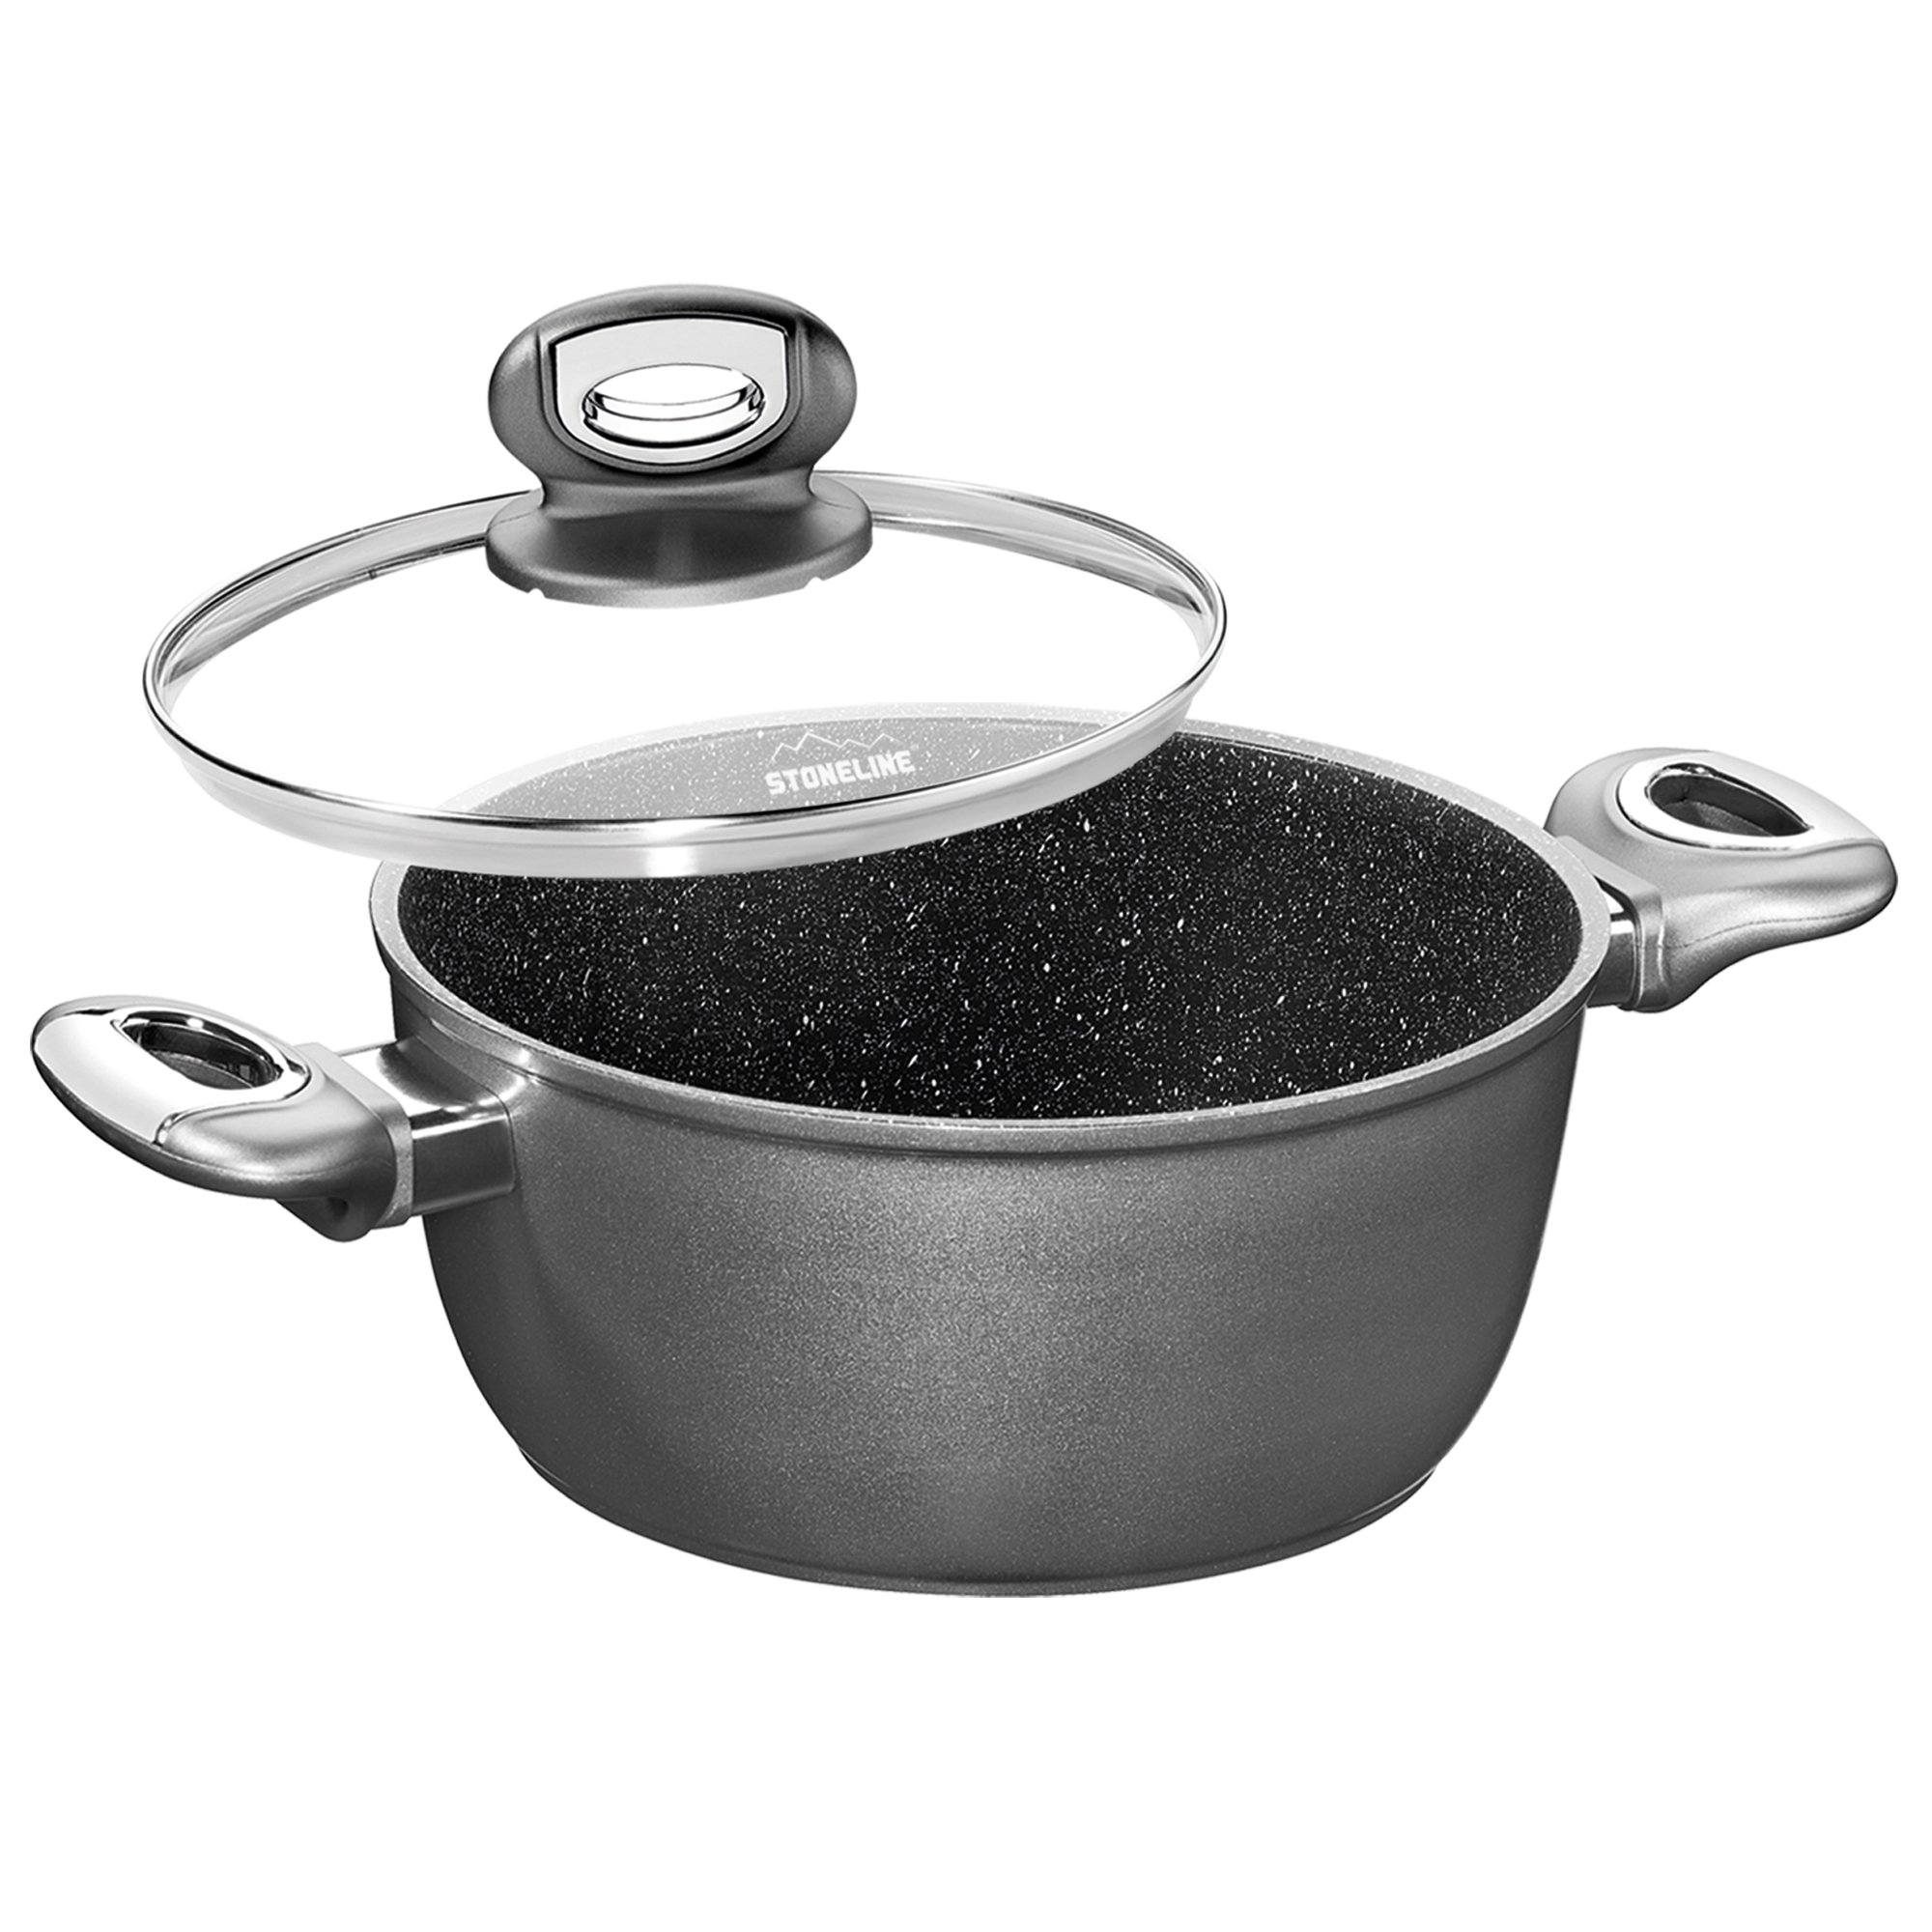 STONELINE® Gourmundo saucepan 20cm, with glass lid, Made in Germany, suitable for induction